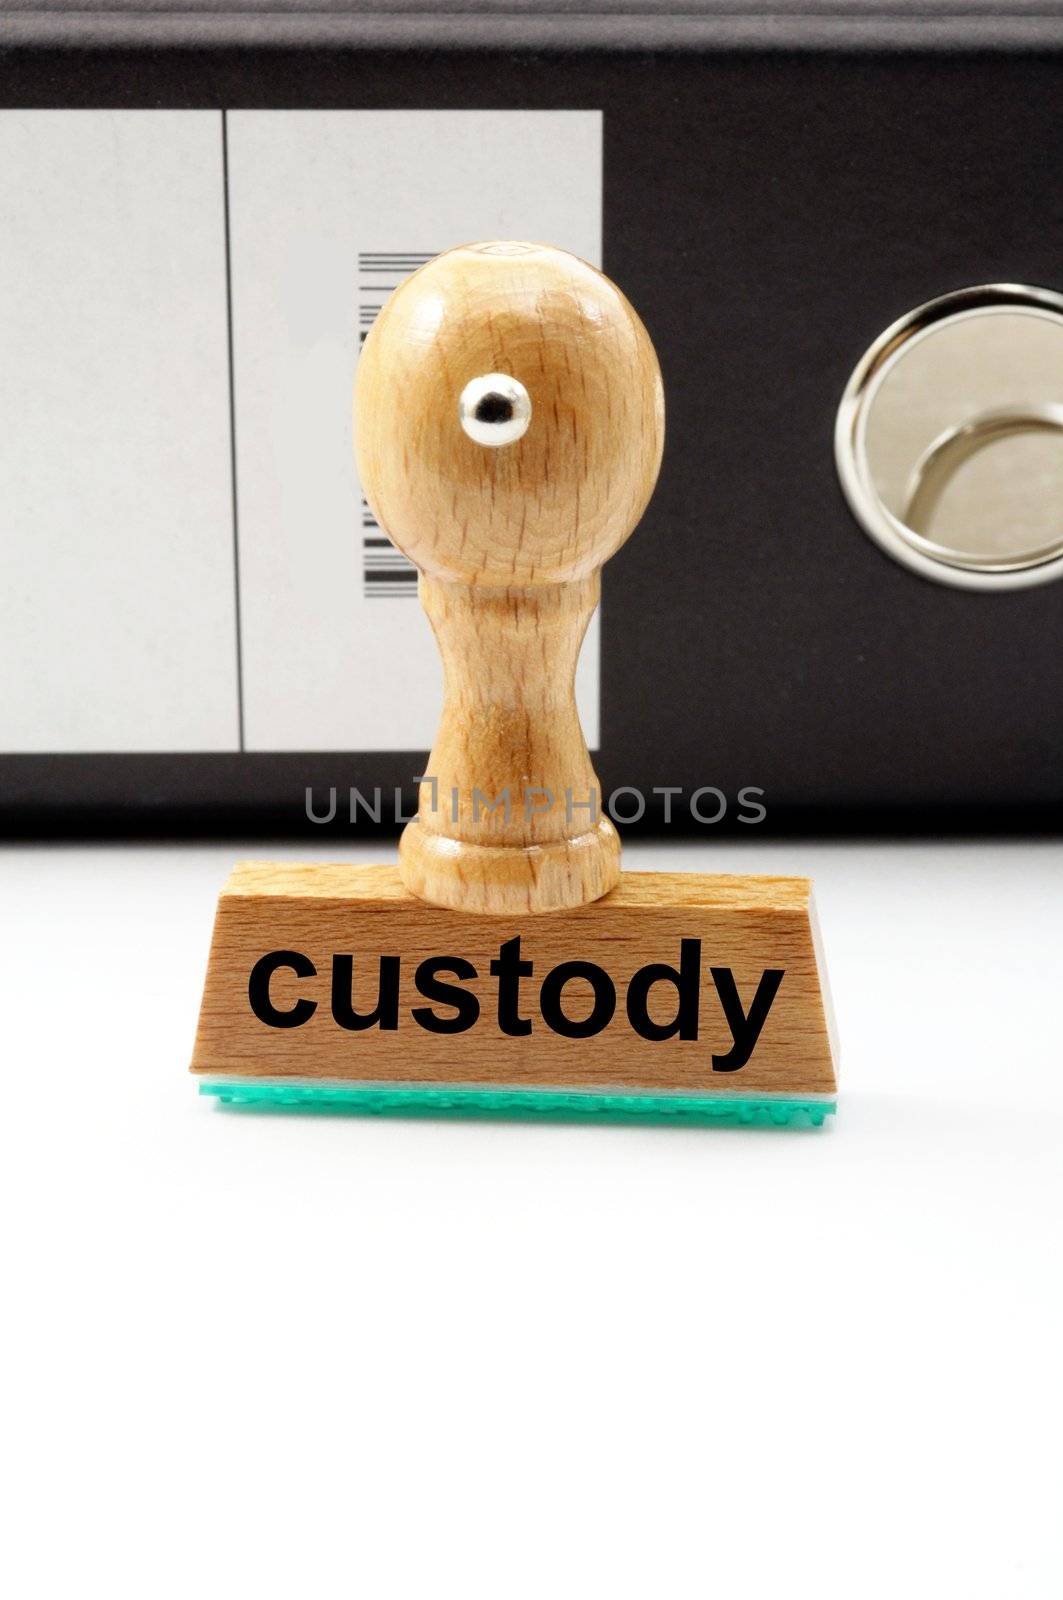 custody stamp showing law or crime concept